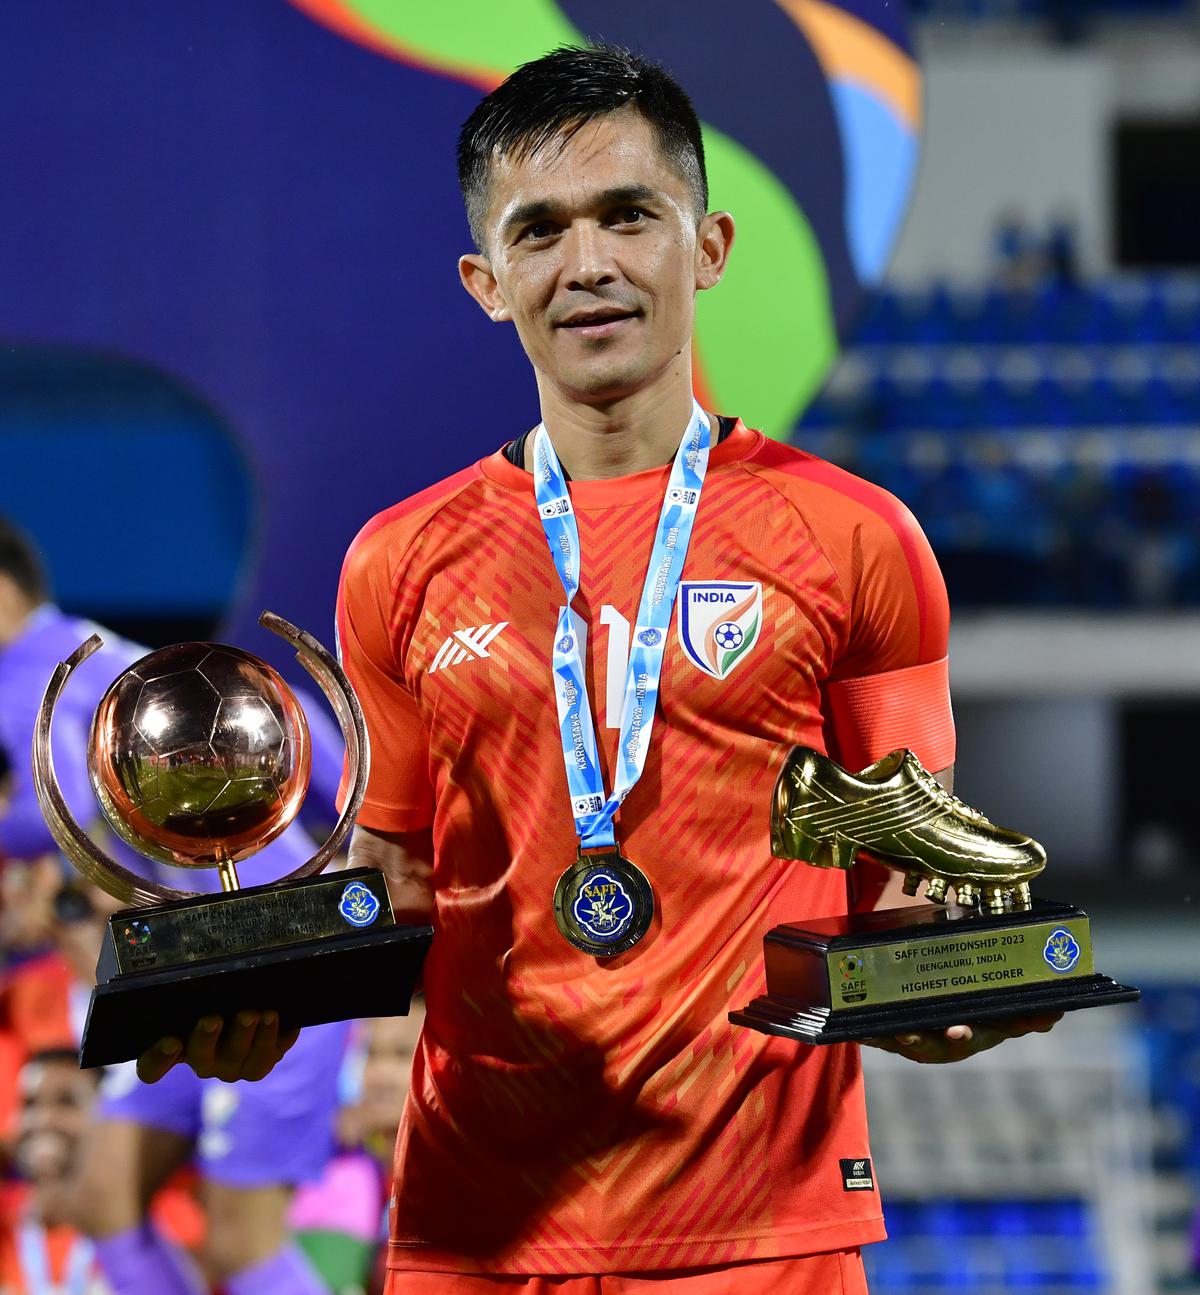 India’s Sunil Chhetri, after winning the SAFF Championship 2023, poses with the best player and highest goalscorer award.